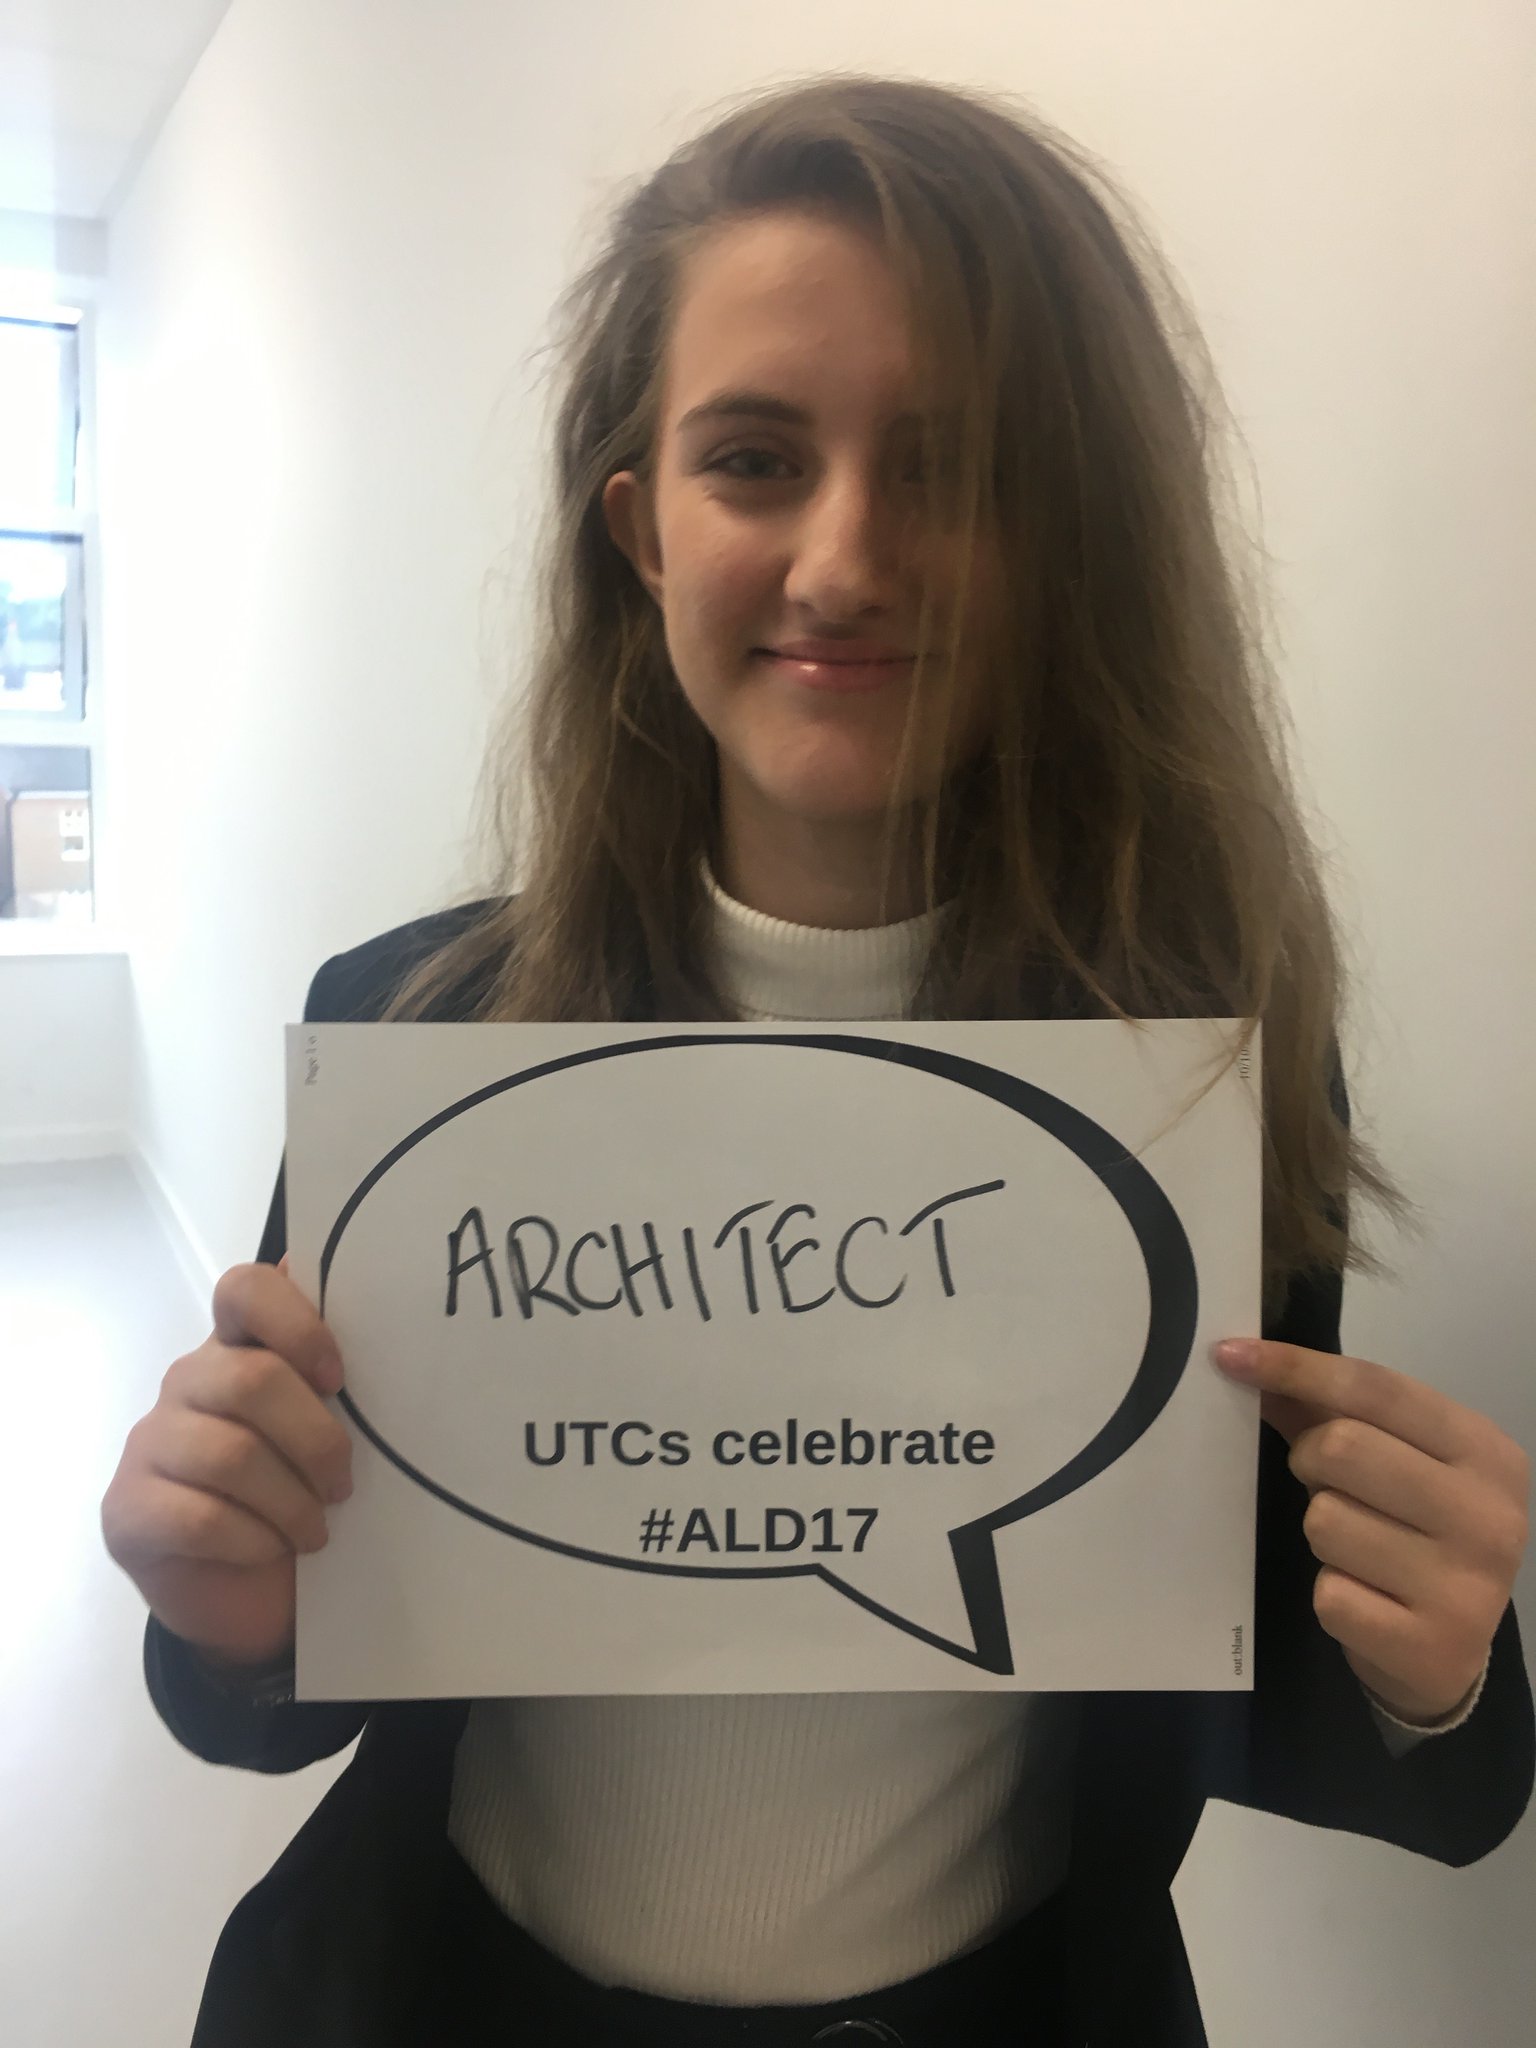 Ardita is inspired by #AdaLovelaceDay @FindingAda #ALD17 and is pursuing a Level 2 Engineering qualification to become an Architect... https://t.co/KceyrG3Zkl